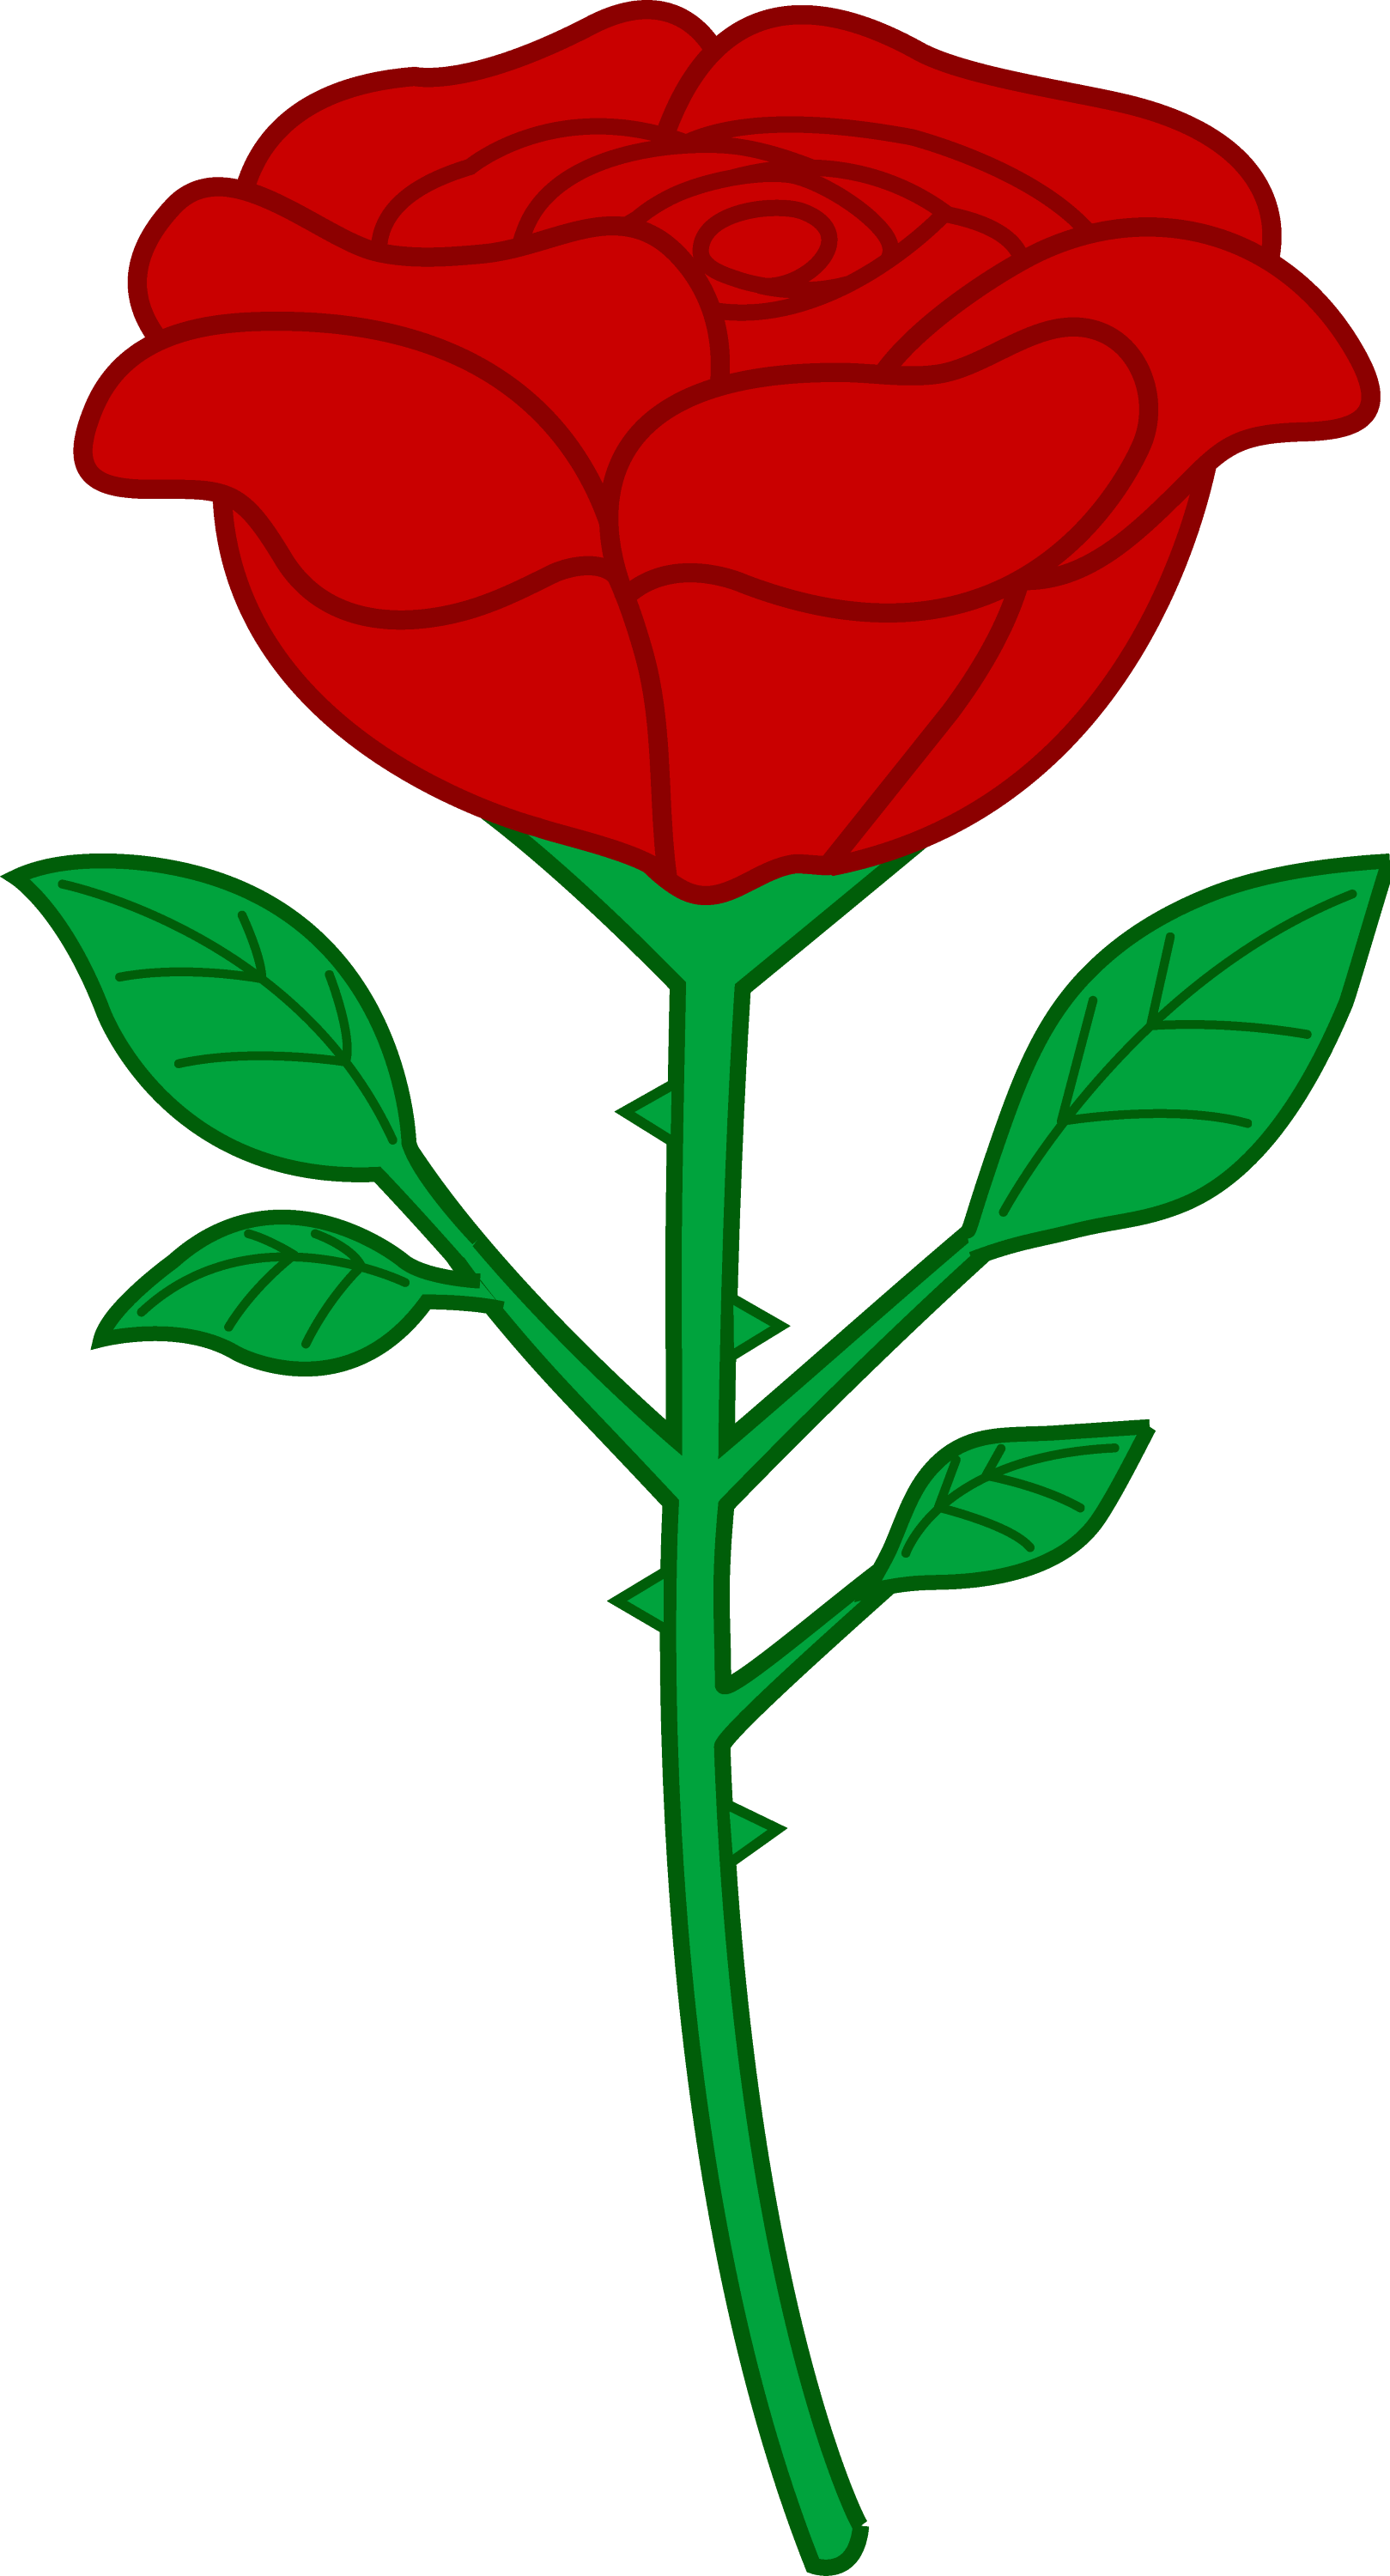 clipart red roses free - photo #41